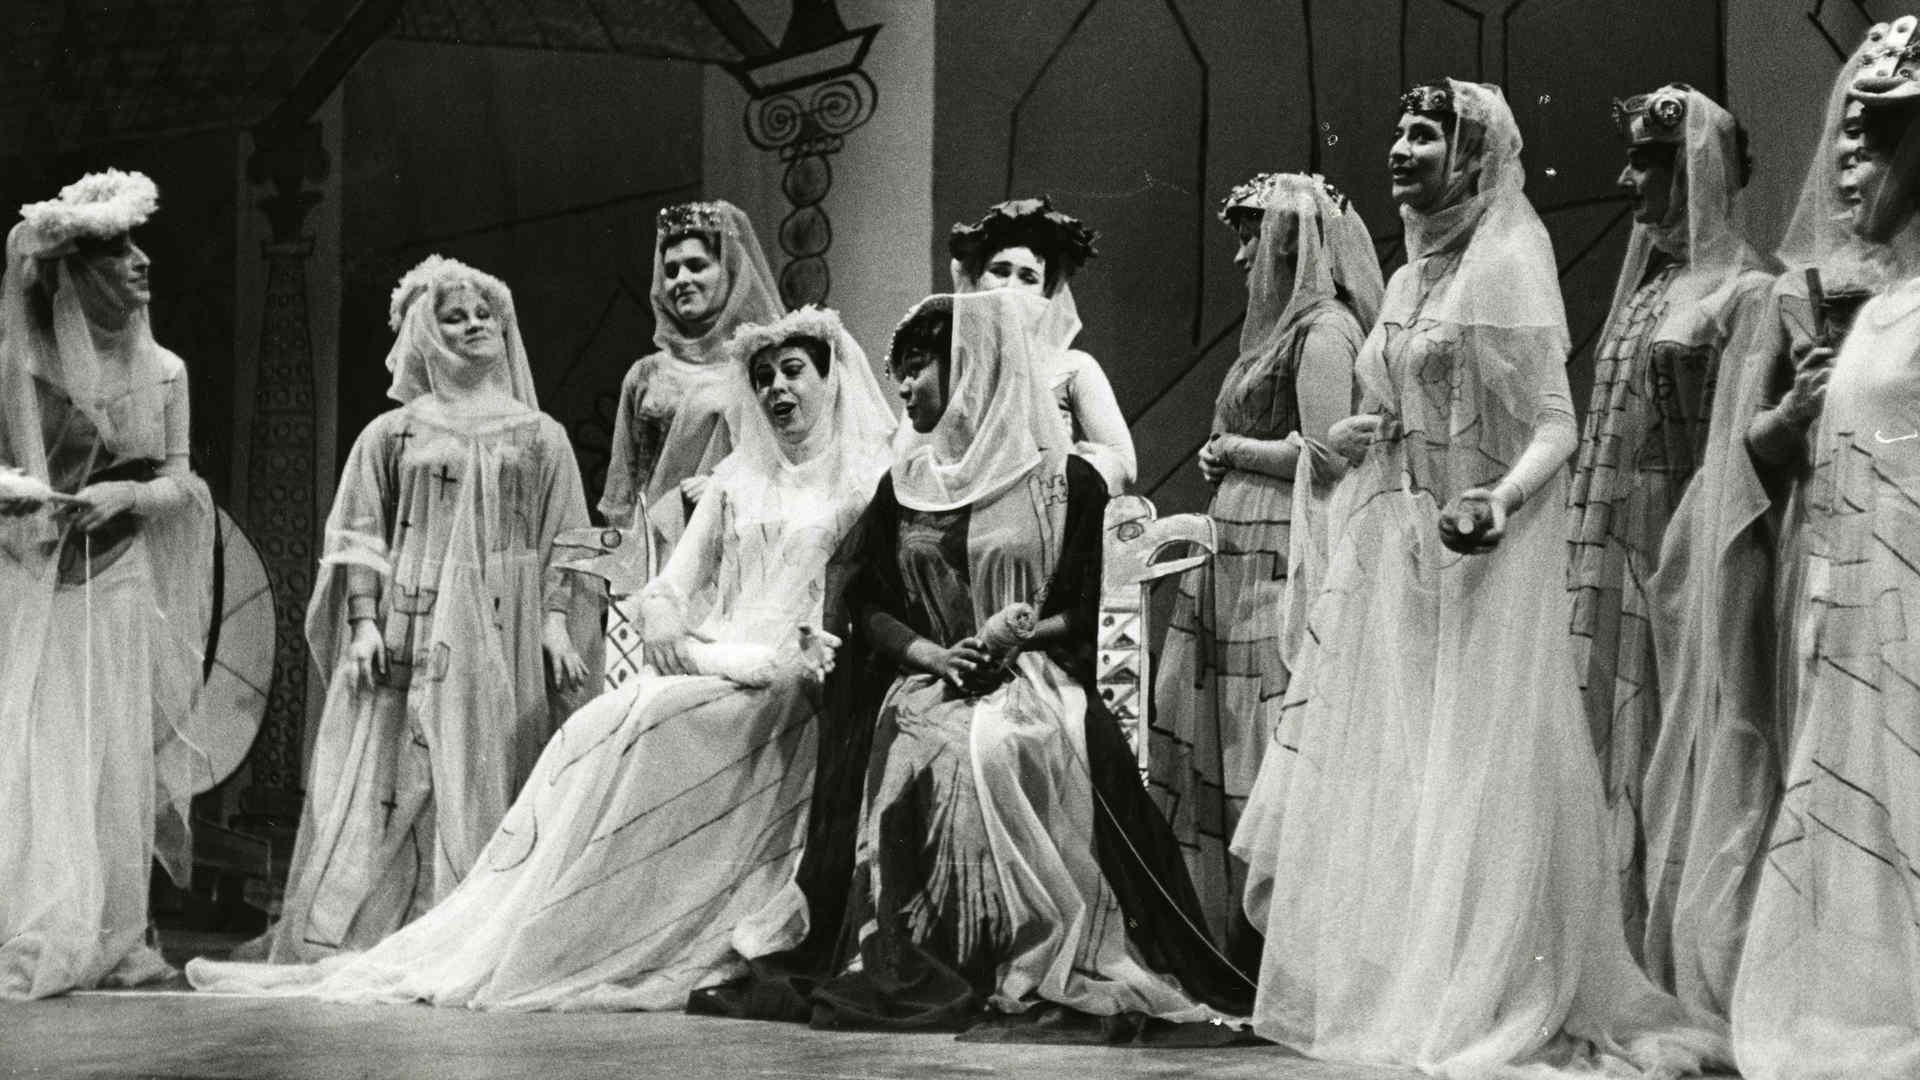 About 10 women in white, flowing dresses on stage in this archival photo from the opera production